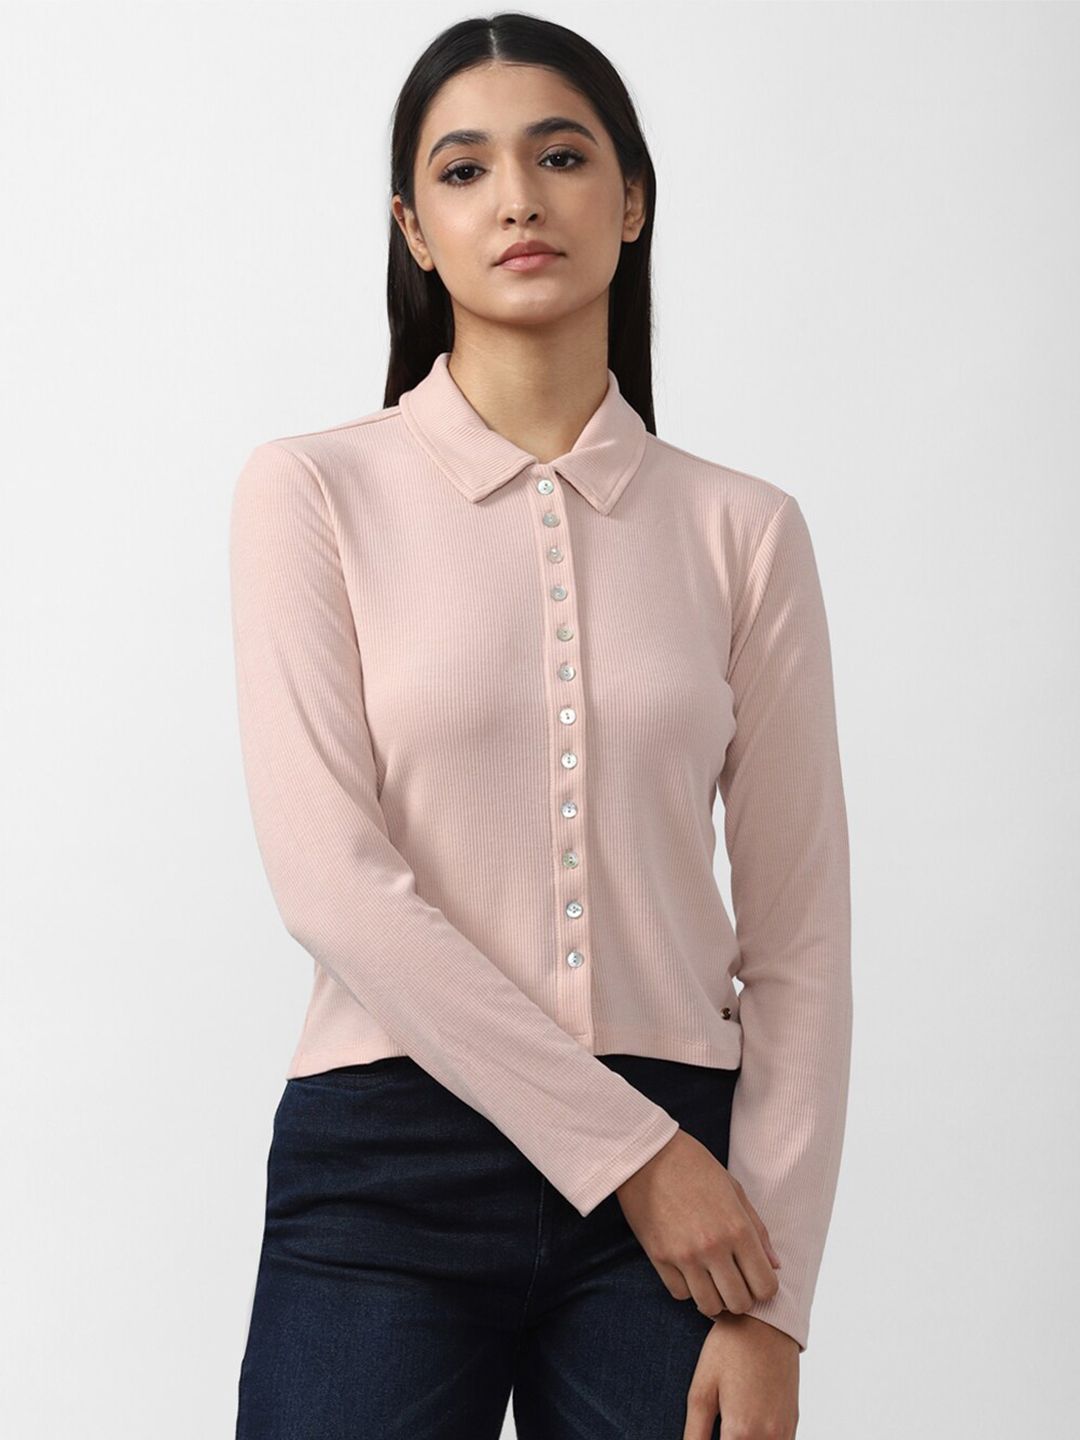 Van Heusen Woman Pink Pure Cotton Shirt Style Top Price in India